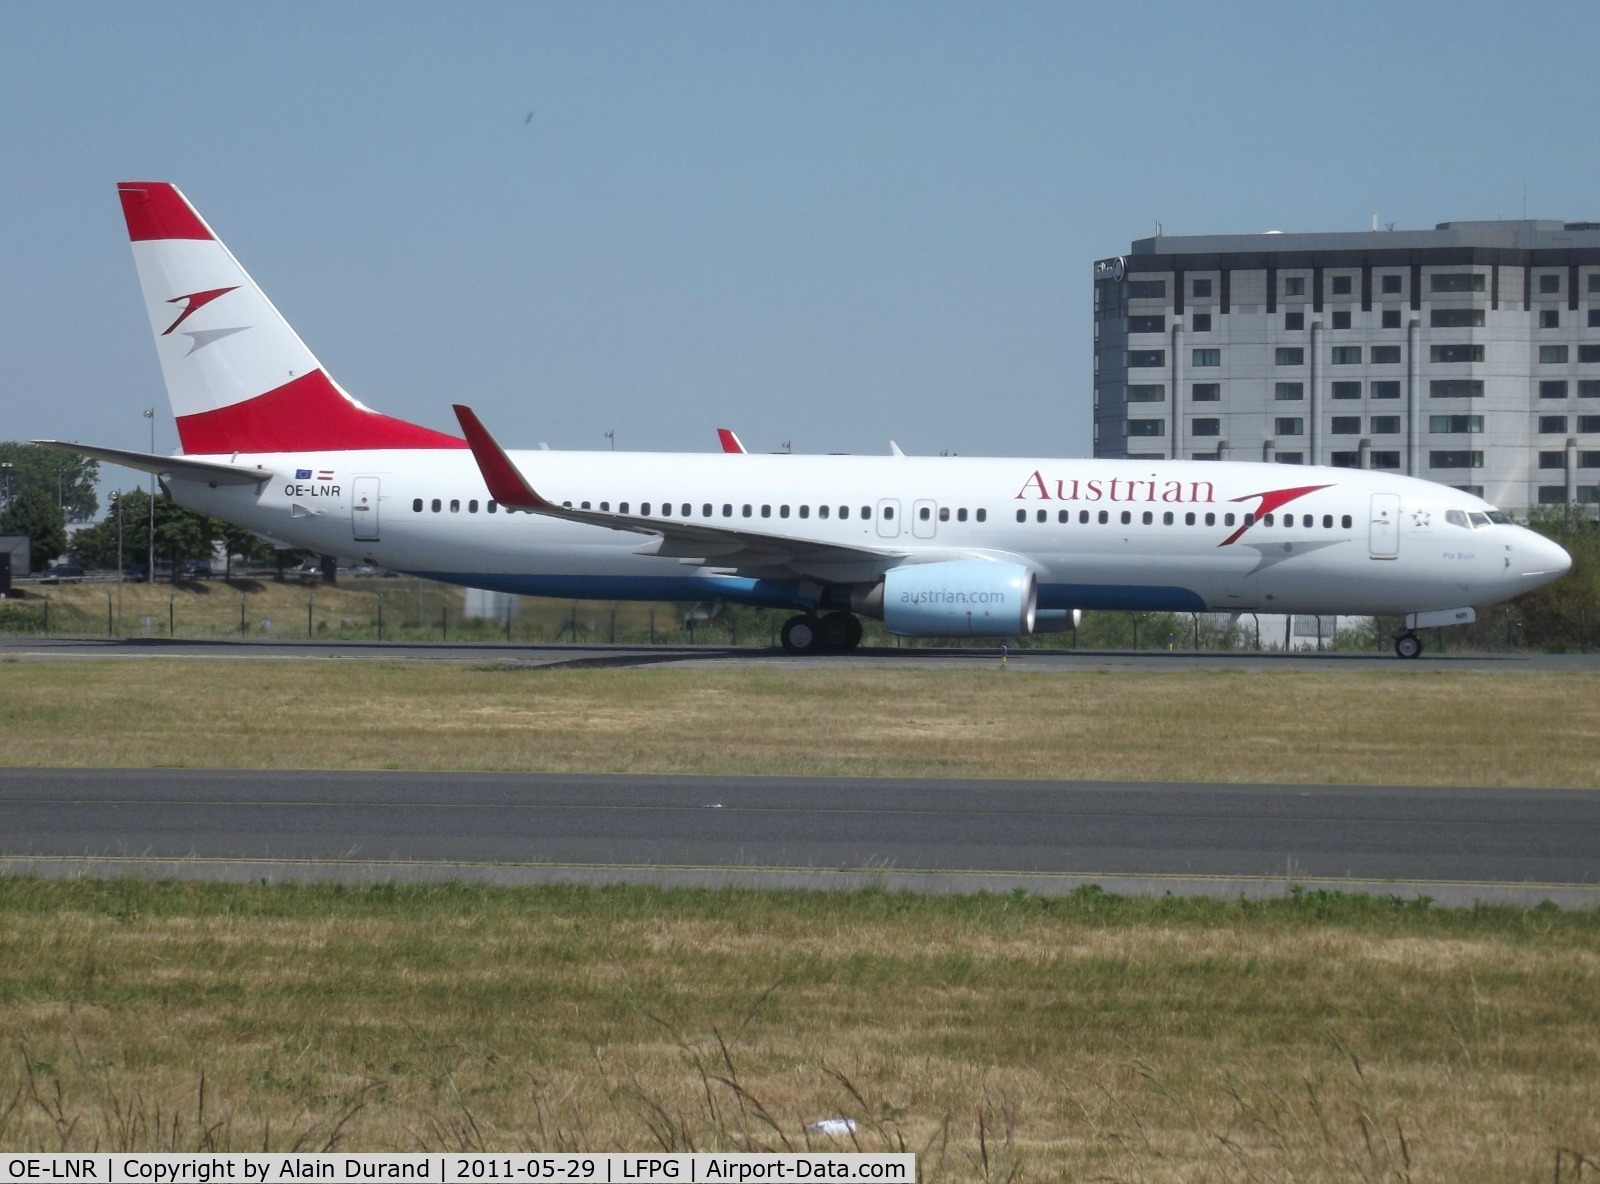 OE-LNR, 2005 Boeing 737-8Z9 C/N 33833, Delivered new to Lauda Air